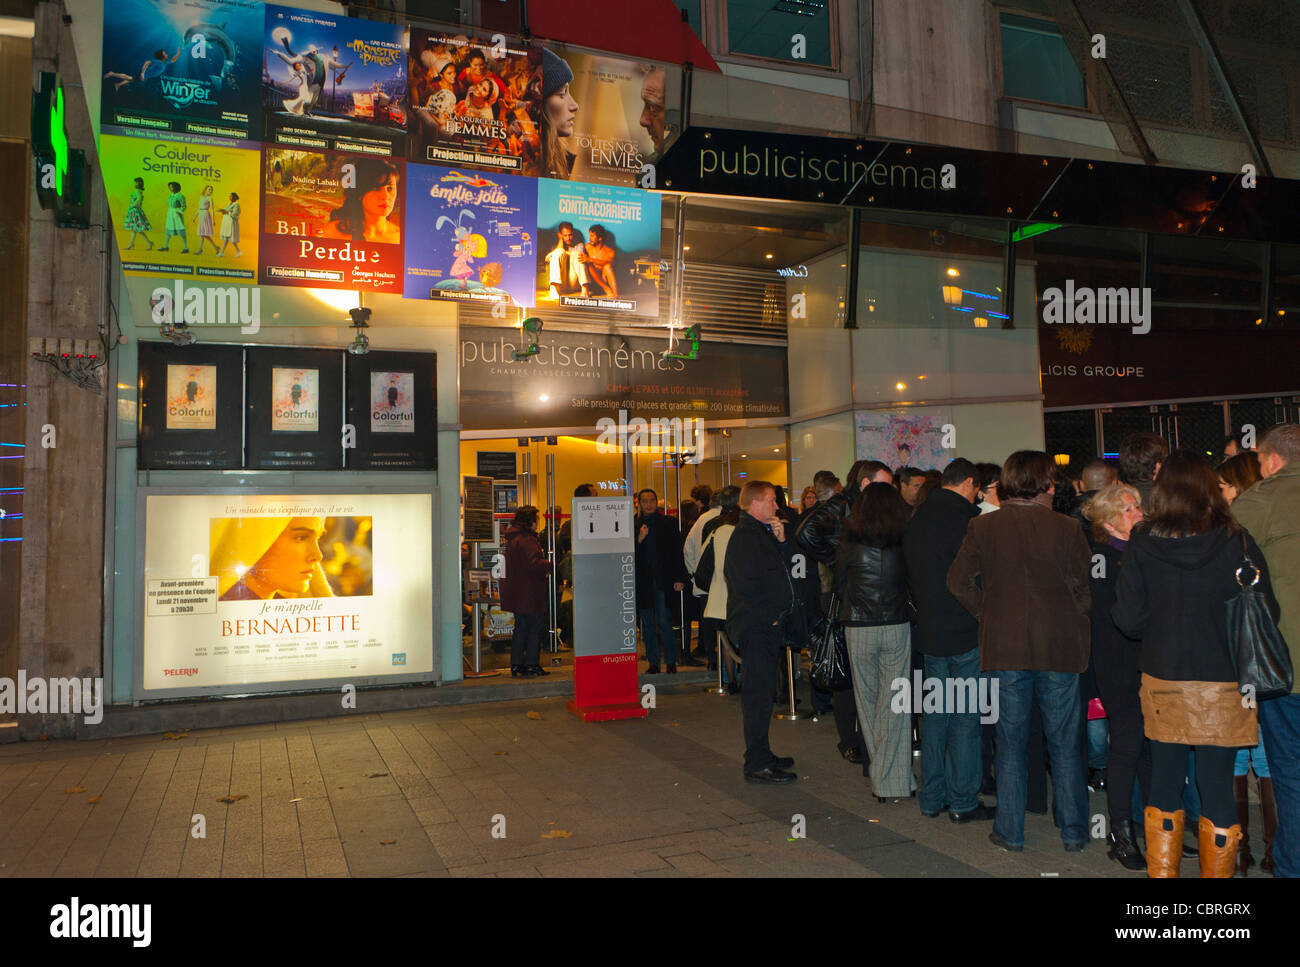 Paris, France, People going to the cinema, Queuing on Line in front of French Cinema Movie Theatre Exterior, Marquee, at Night Exterior, on Avenue Champs ELysees 'Drugstore Publicis' french films Stock Photo